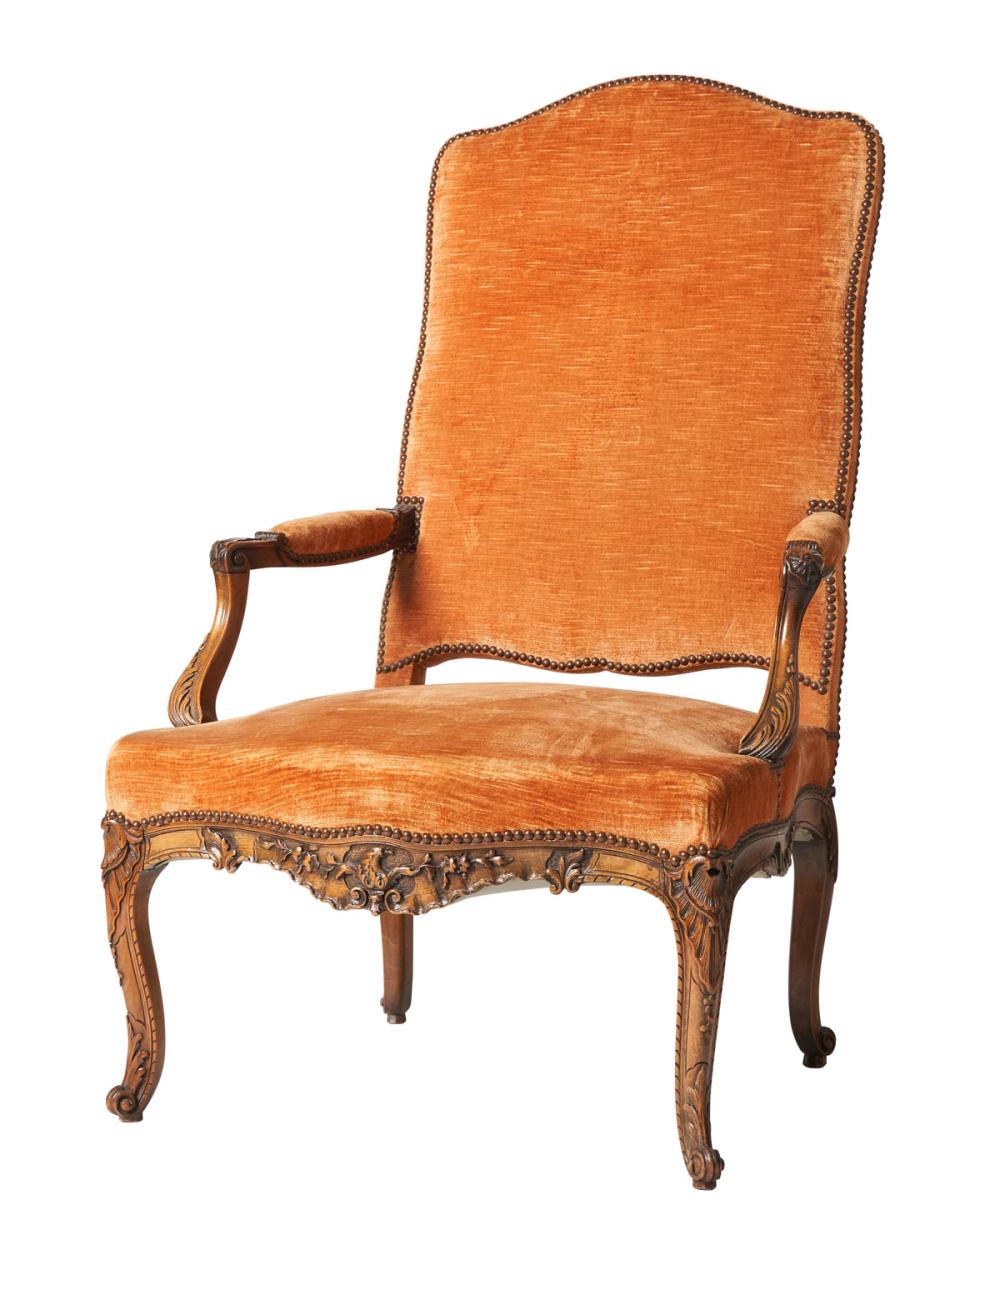 SOLD A Louis XV style carved walnut armchair, French 19th Century